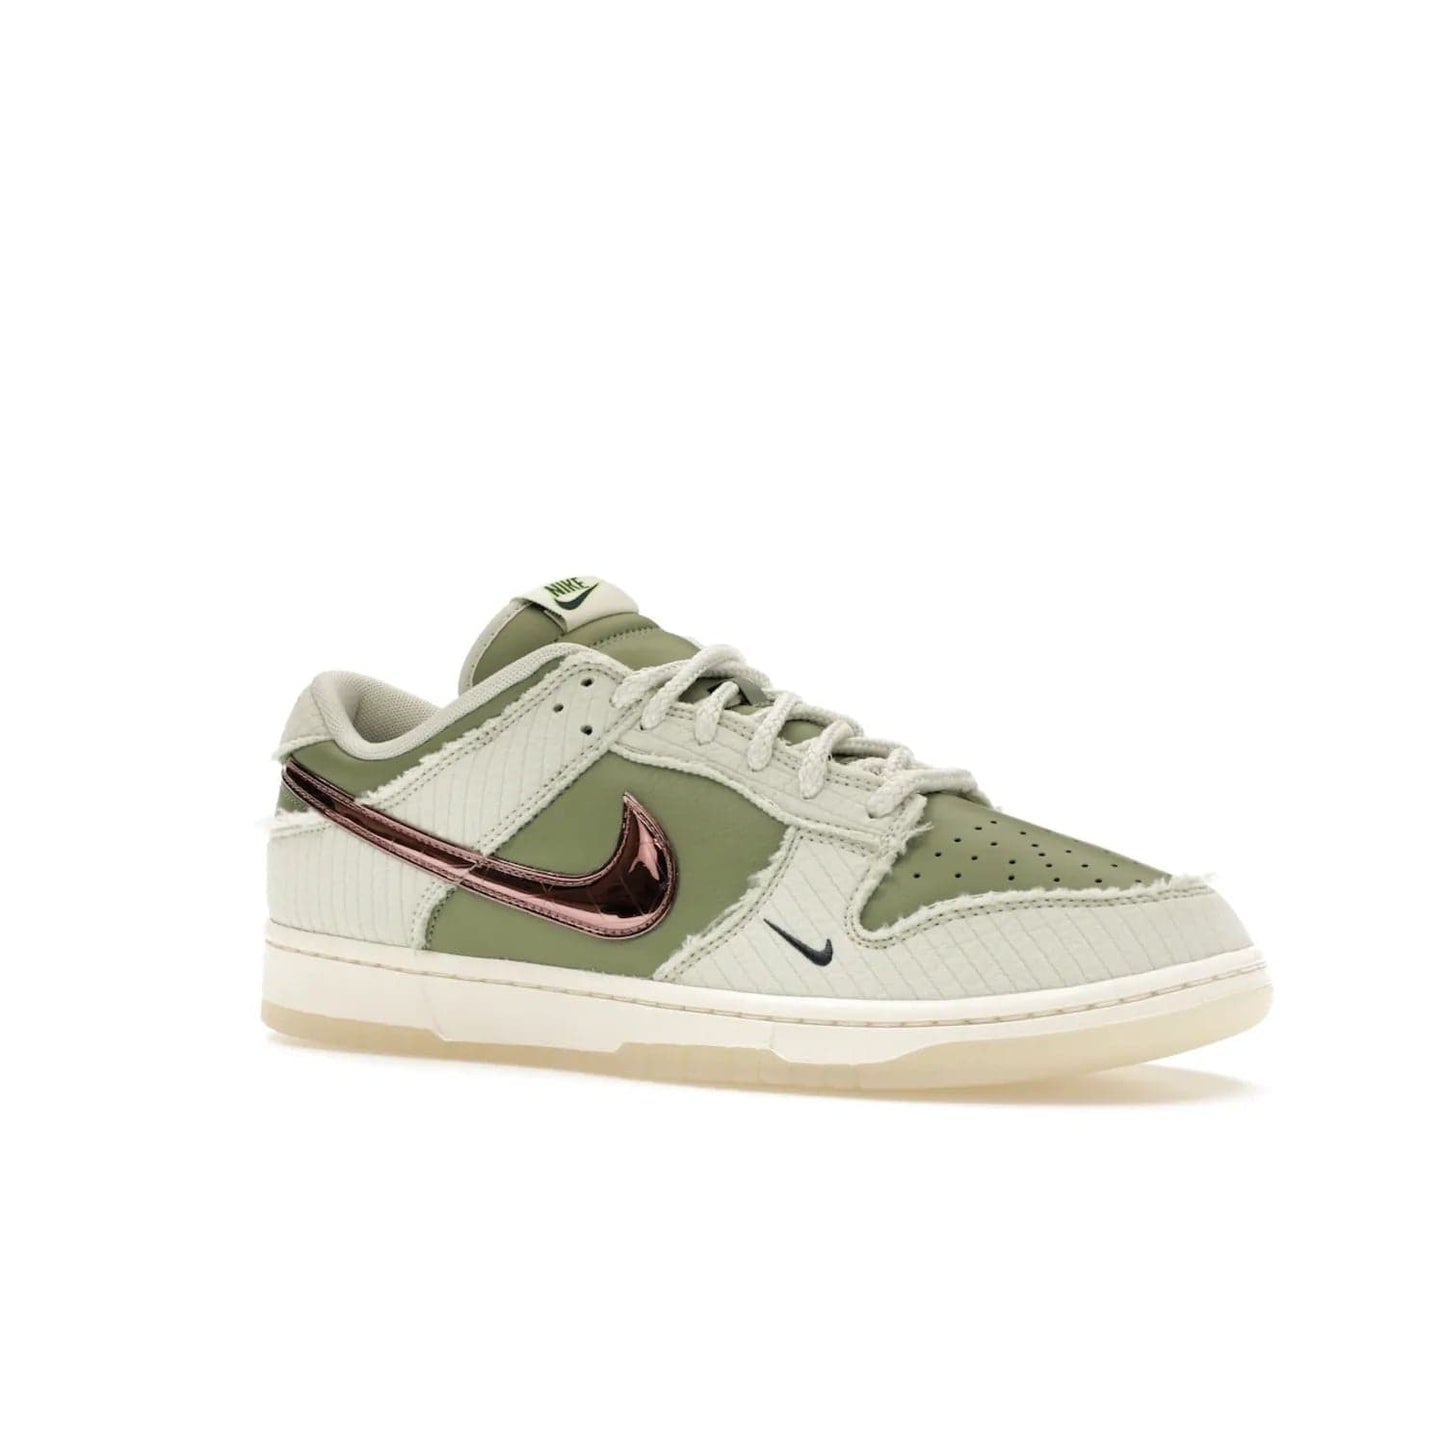 Nike Dunk Low Retro PRM Kyler Murray Be 1 of One - Image 4 - Only at www.BallersClubKickz.com - Introducing the Nike Dunk Low Retro PRM Kyler Murray "Be 1 of One"! A Sea Glass upper with Sail and Oil Green accents, finished with Rose Gold accents. Drop date: November 10th.